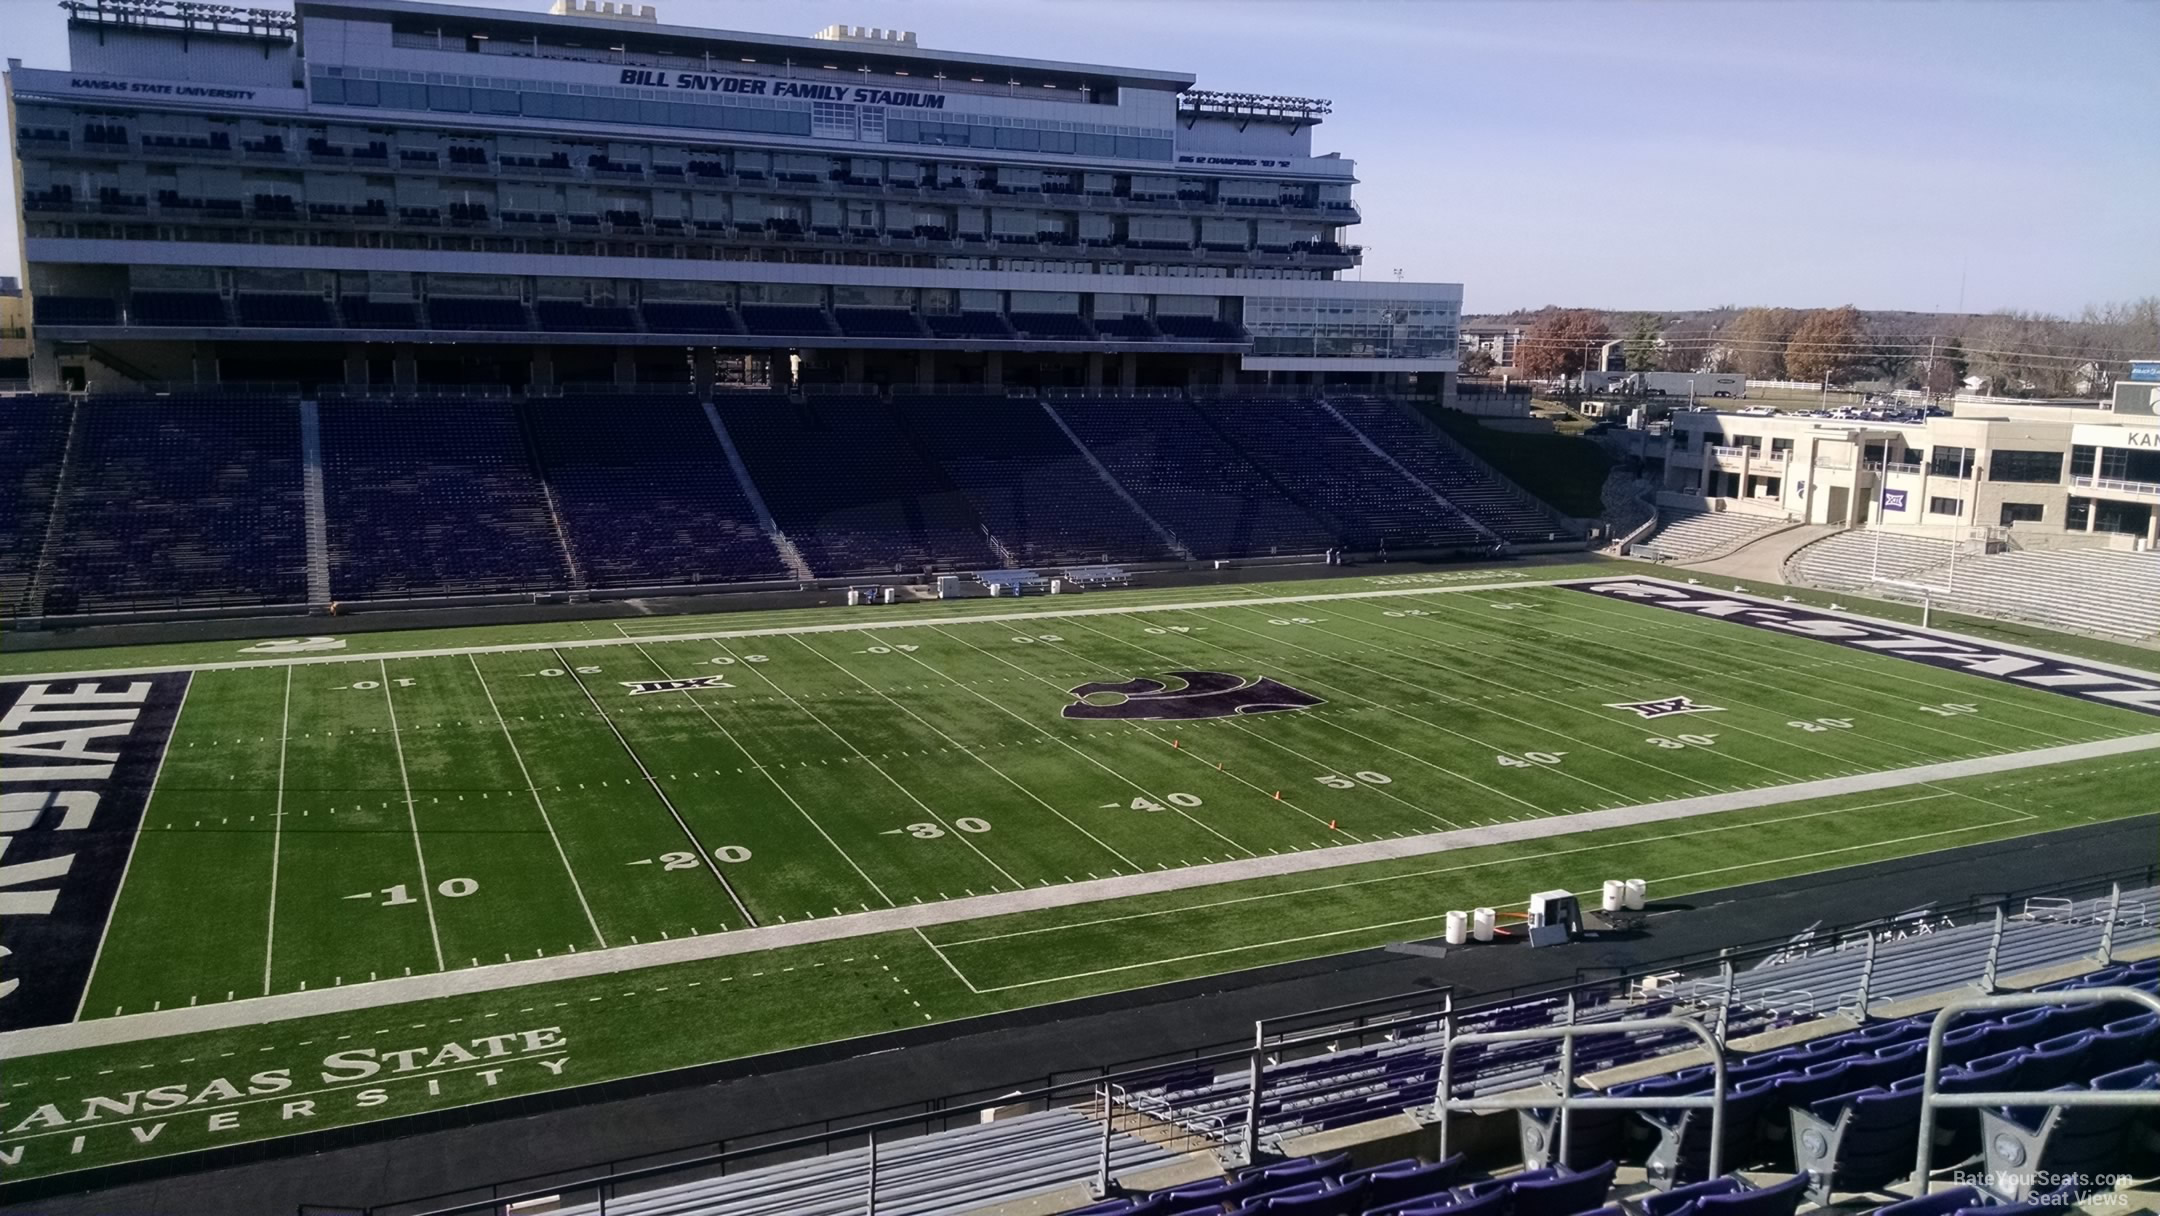 section 223, row 9 seat view  - bill snyder family stadium